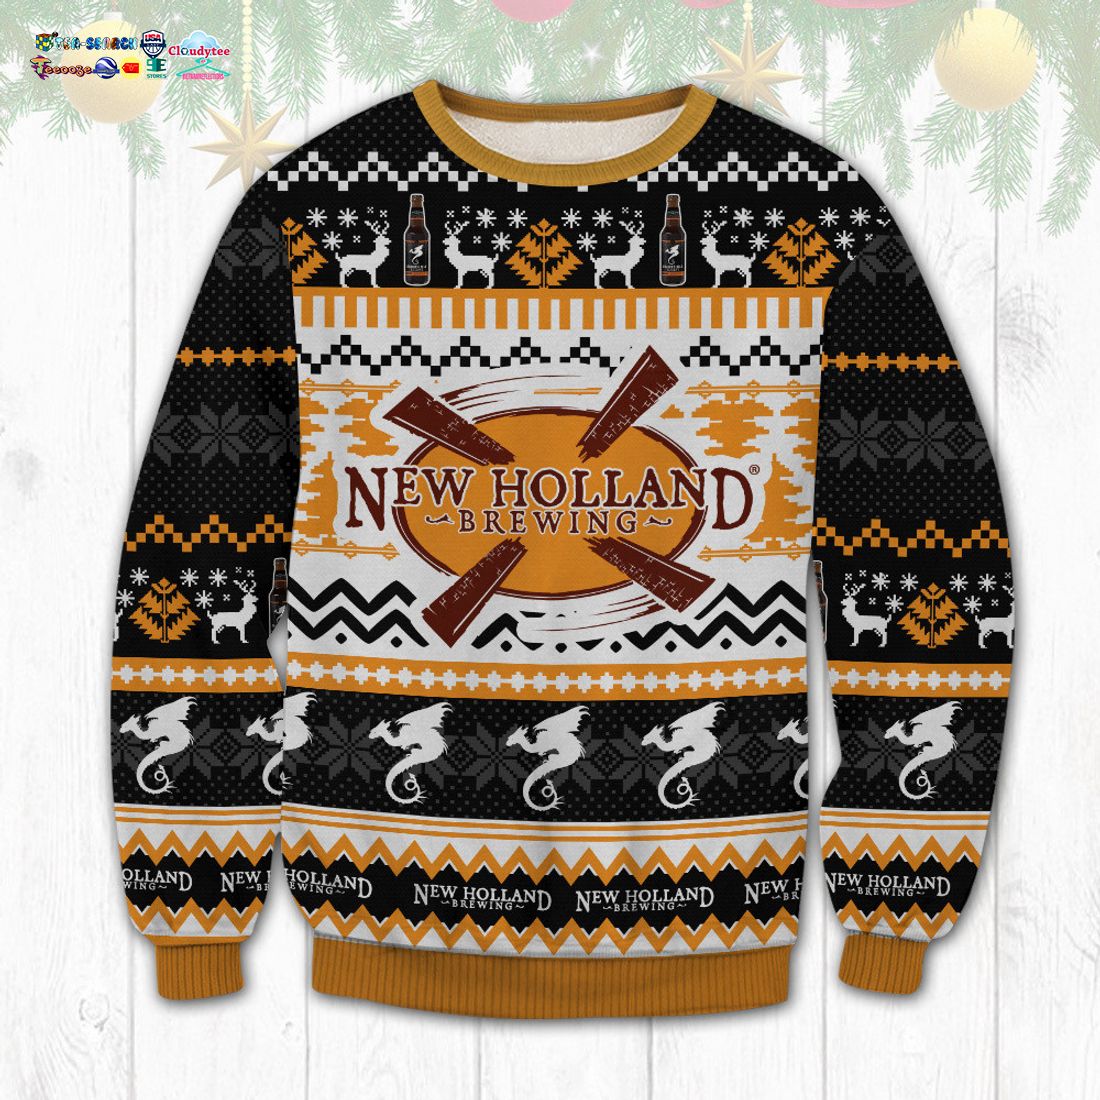 New Holland Ugly Christmas Sweater - Nice place and nice picture